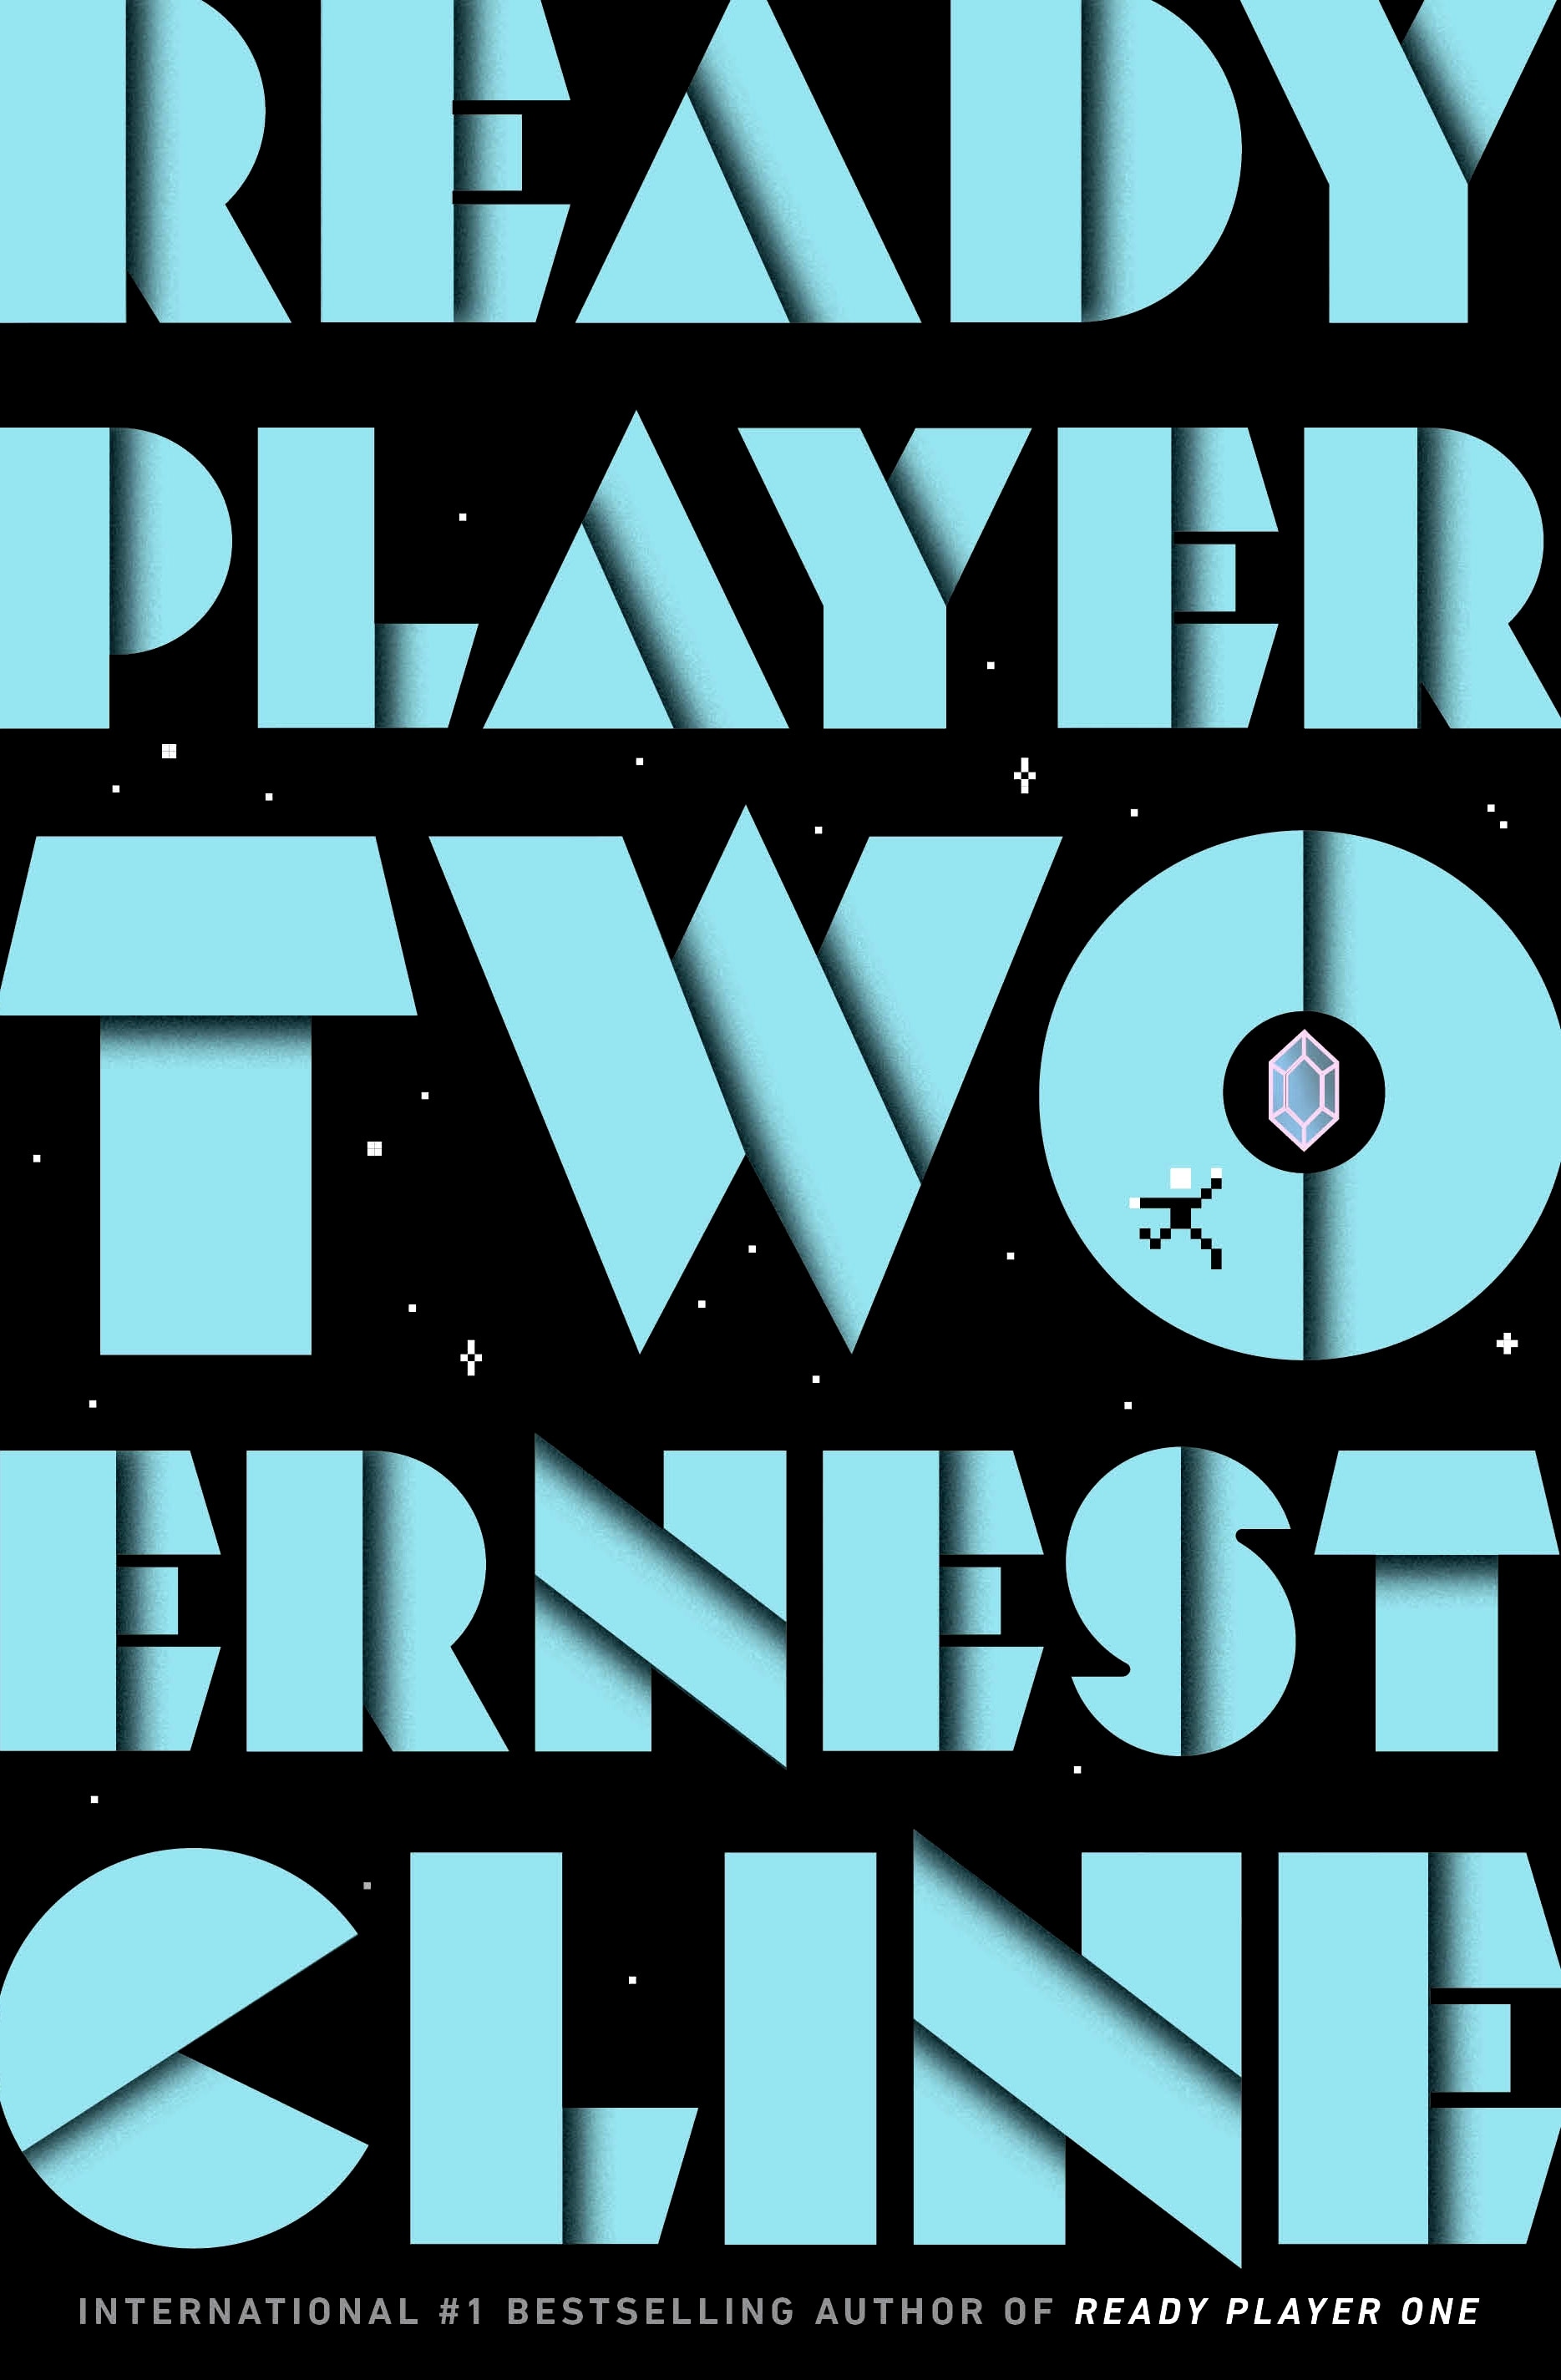 Book “Ready Player Two” by Ernest Cline — November 24, 2020